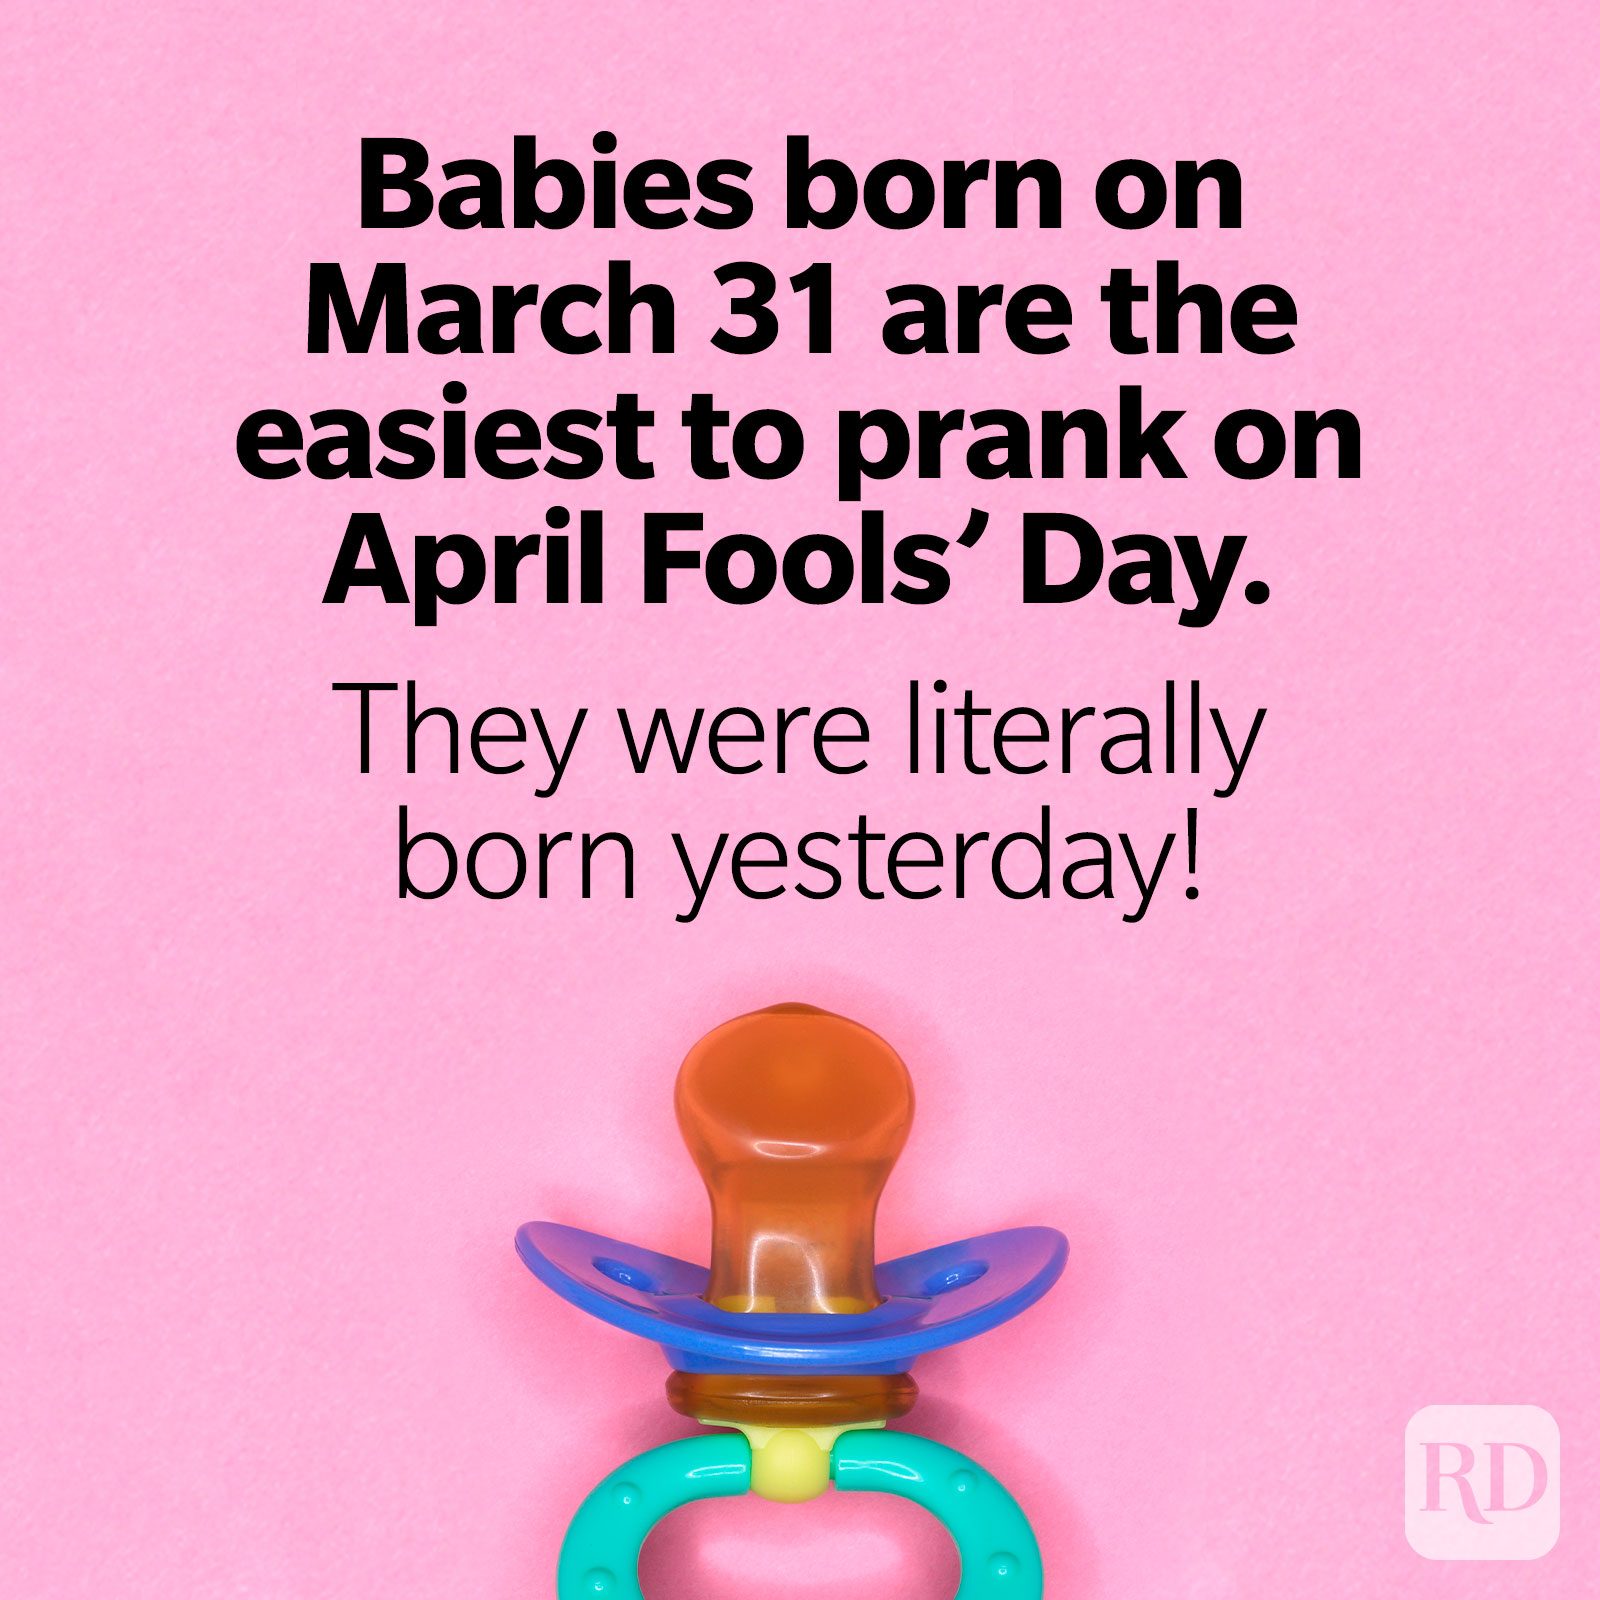 Here's our roundup of the best April Fools' Day jokes of 2020